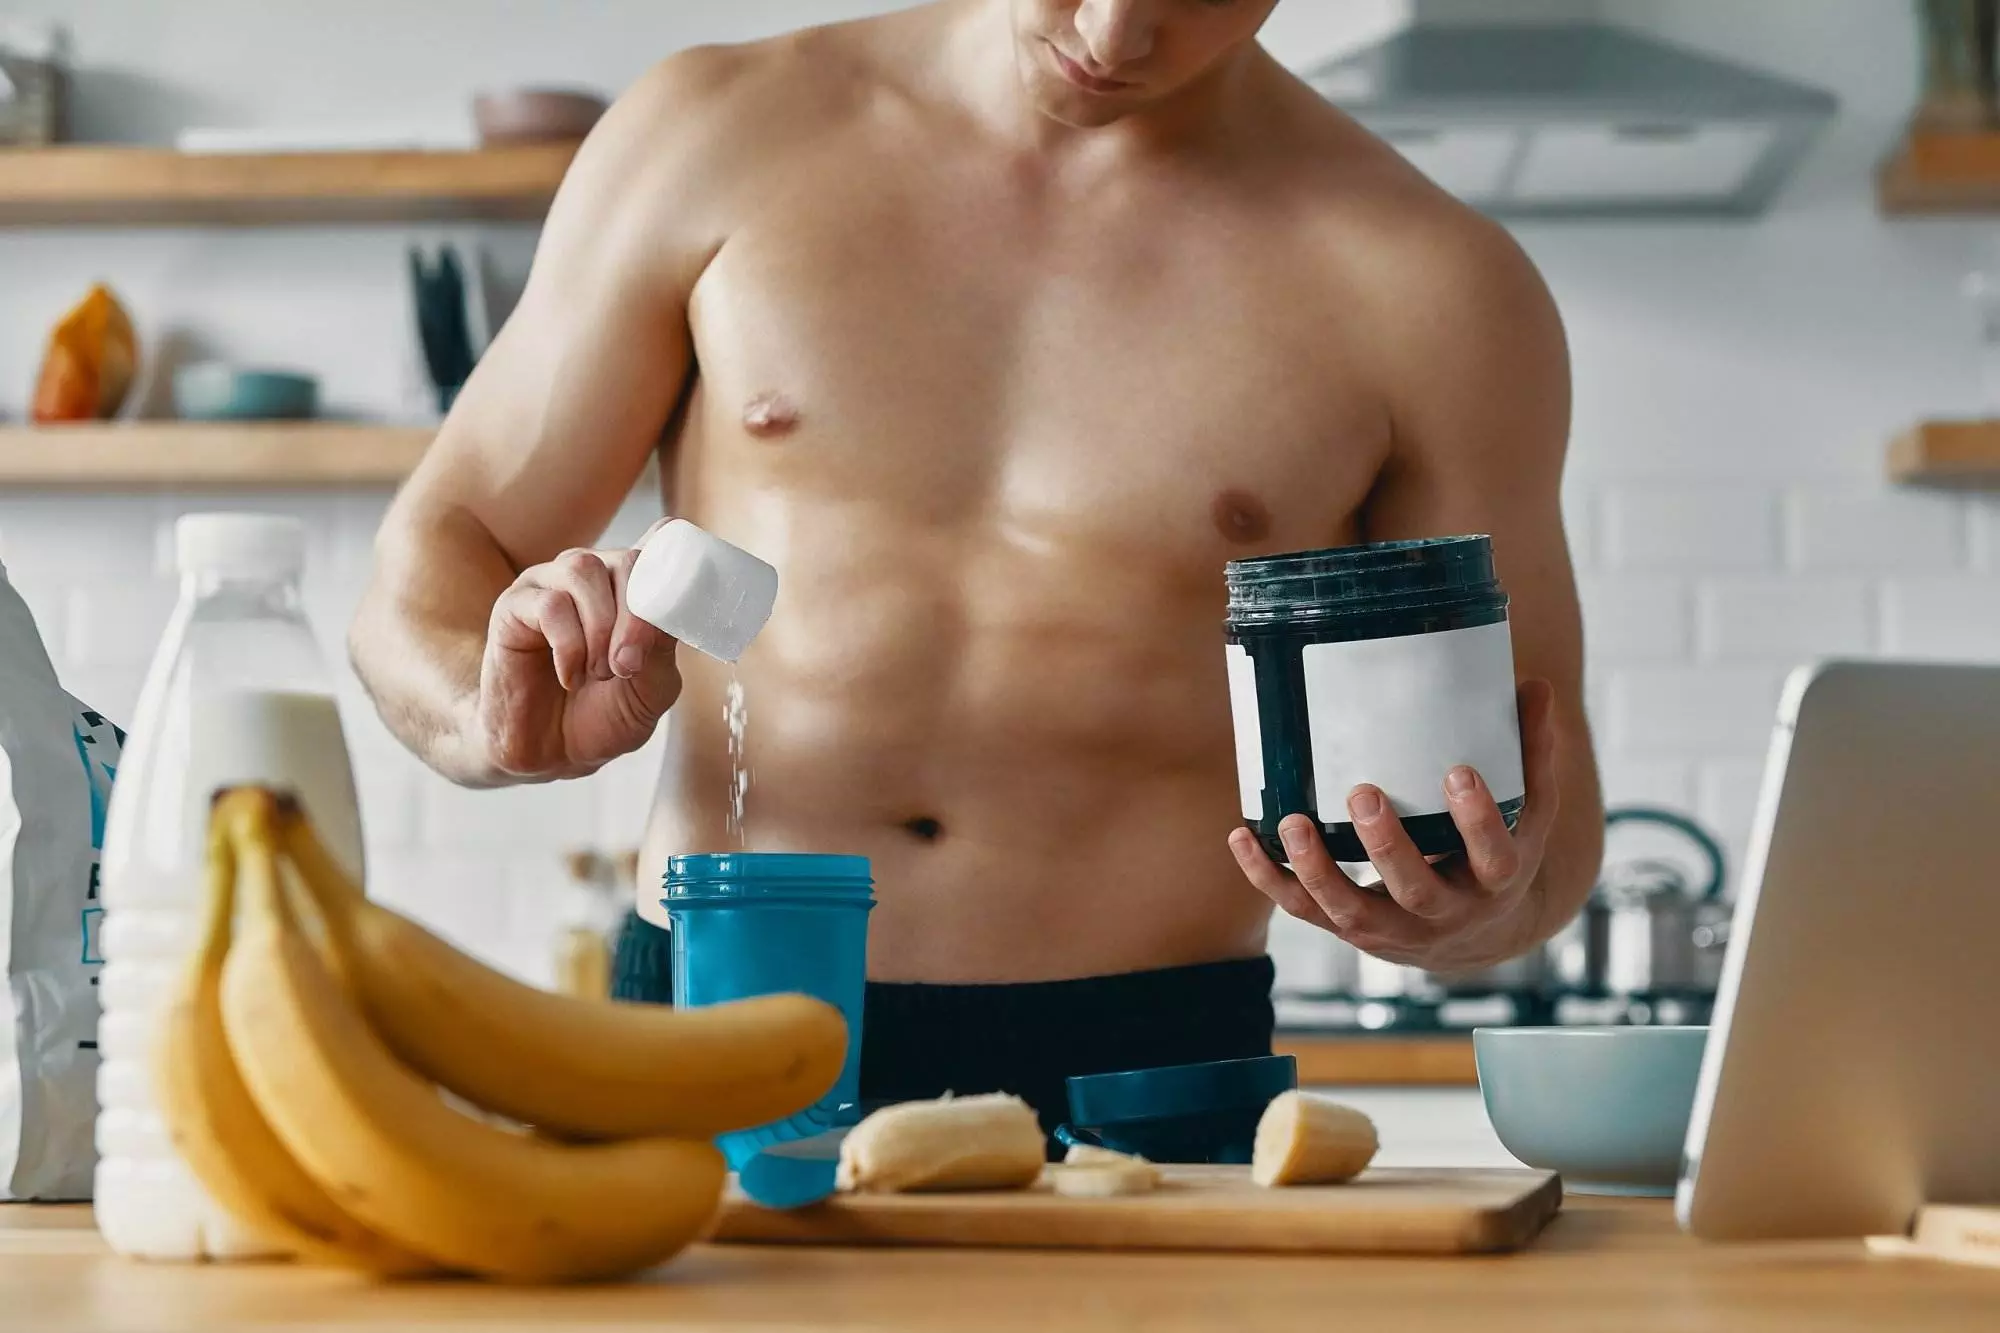 Handsome fit man preparing protein drink while standing at the kitchen